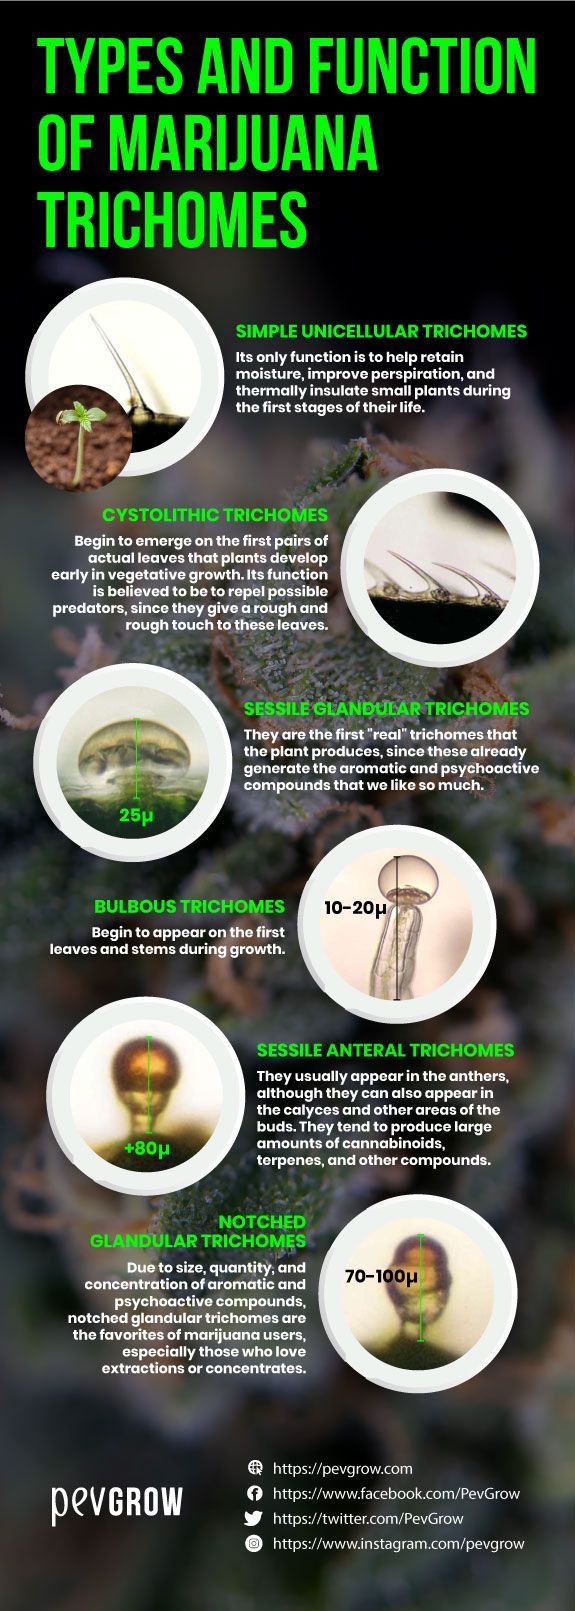 Summary of types and functions of marijuana trichomes